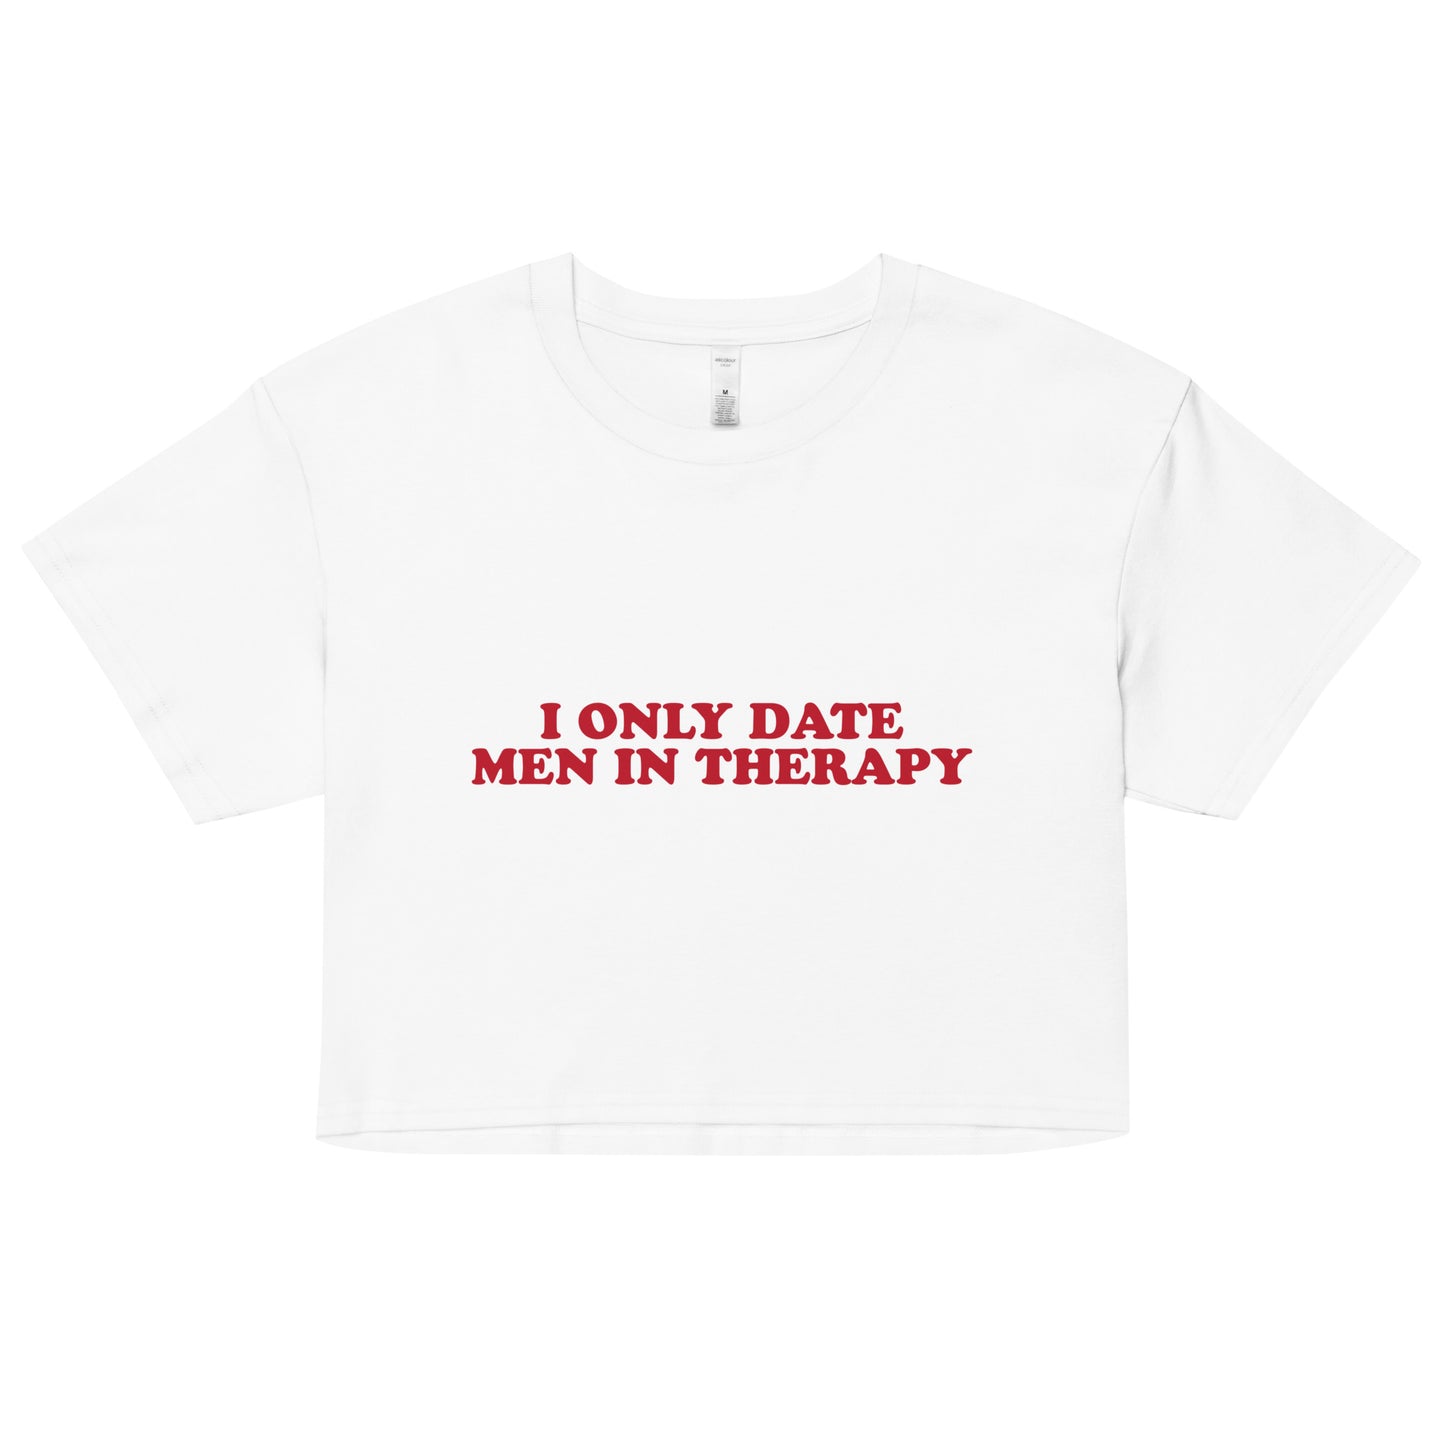 I Only Date Men in Therapy Women’s crop top